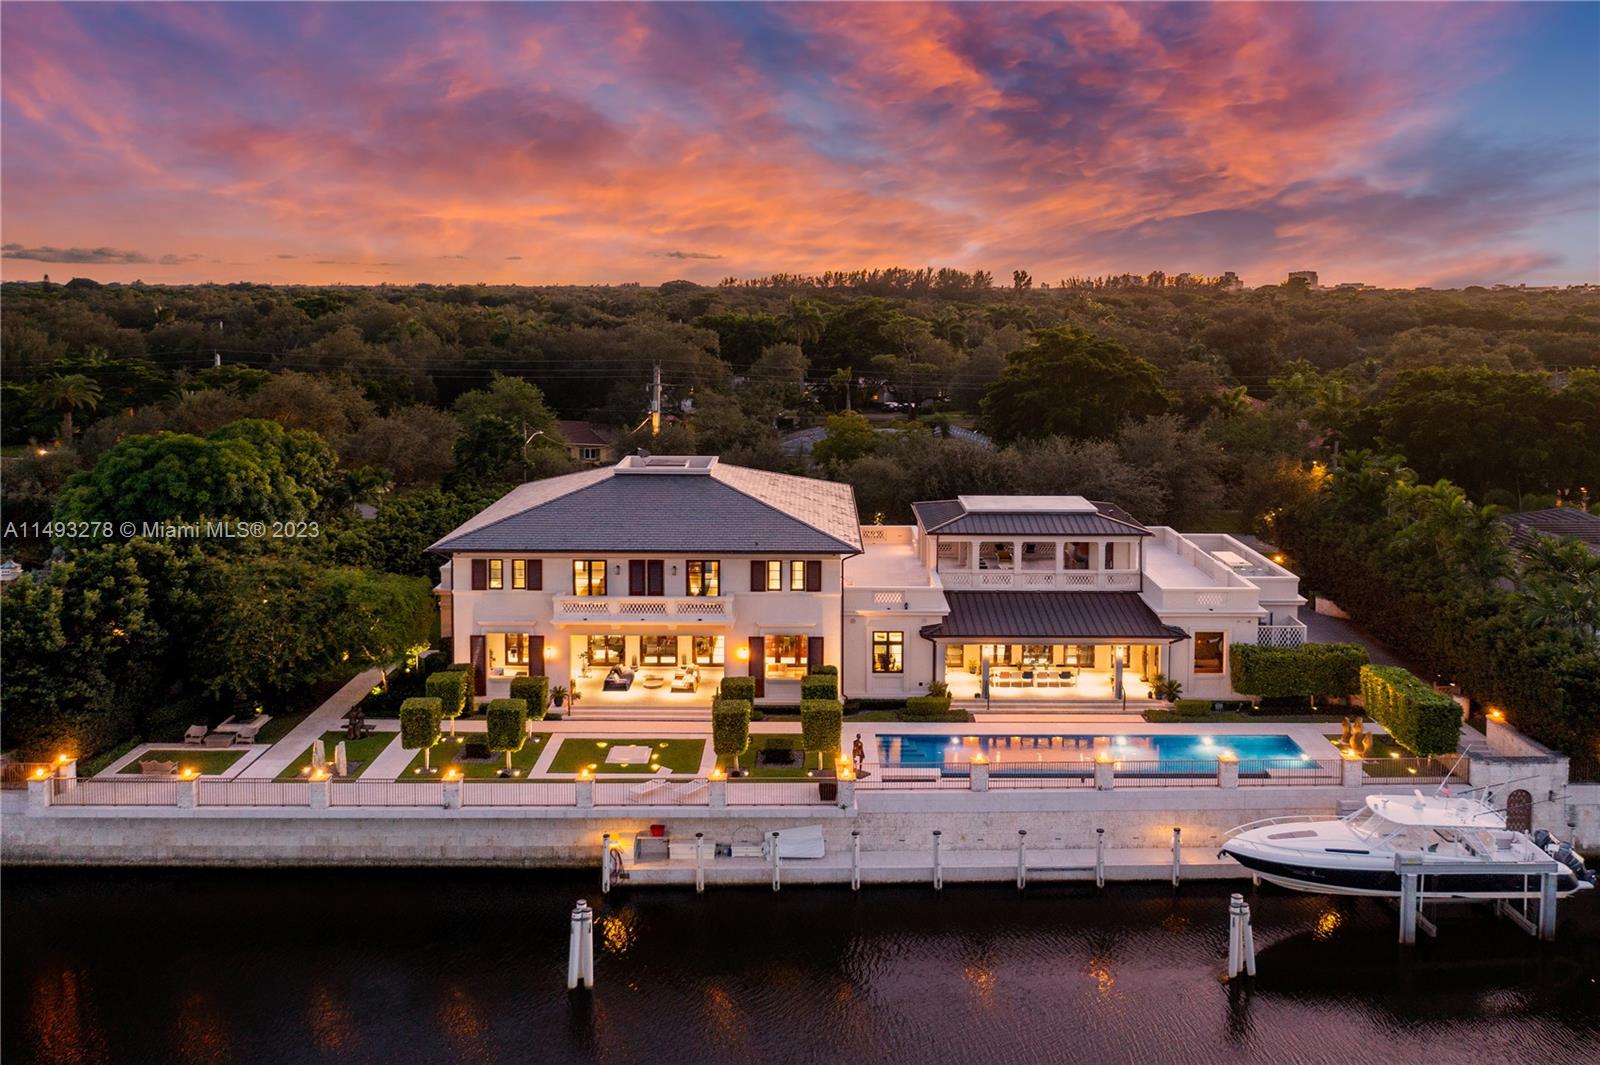 Masterful design & luxury are showcased in this 6BD, 7BA, 4HB custom-built waterfront home in highly-sought after Coral Gables. Enjoy the epitome of WF living w/ 200’ on the water, views of manatees & a refreshing ocean breeze. The outdoors captivate w/ an architectural sculpture garden, 60’ infinity pool, covered terraces & summer kitchen. Every detail of this remarkable 12,173 SF home was quality crafted. Residence features an expansive layout, volume ceilings, 2 elevators & a whole house generator. Chef's eat-in kitchen showcases elegant emerald quartz countertops, top-of-the-line appliances, oversized island w/ seating & separate breakfast area. Enjoy sunrises & sunsets from a spacious rooftop veranda. Additional features: wine cellar, service quarters, 3-car garage & dual-gated entry.